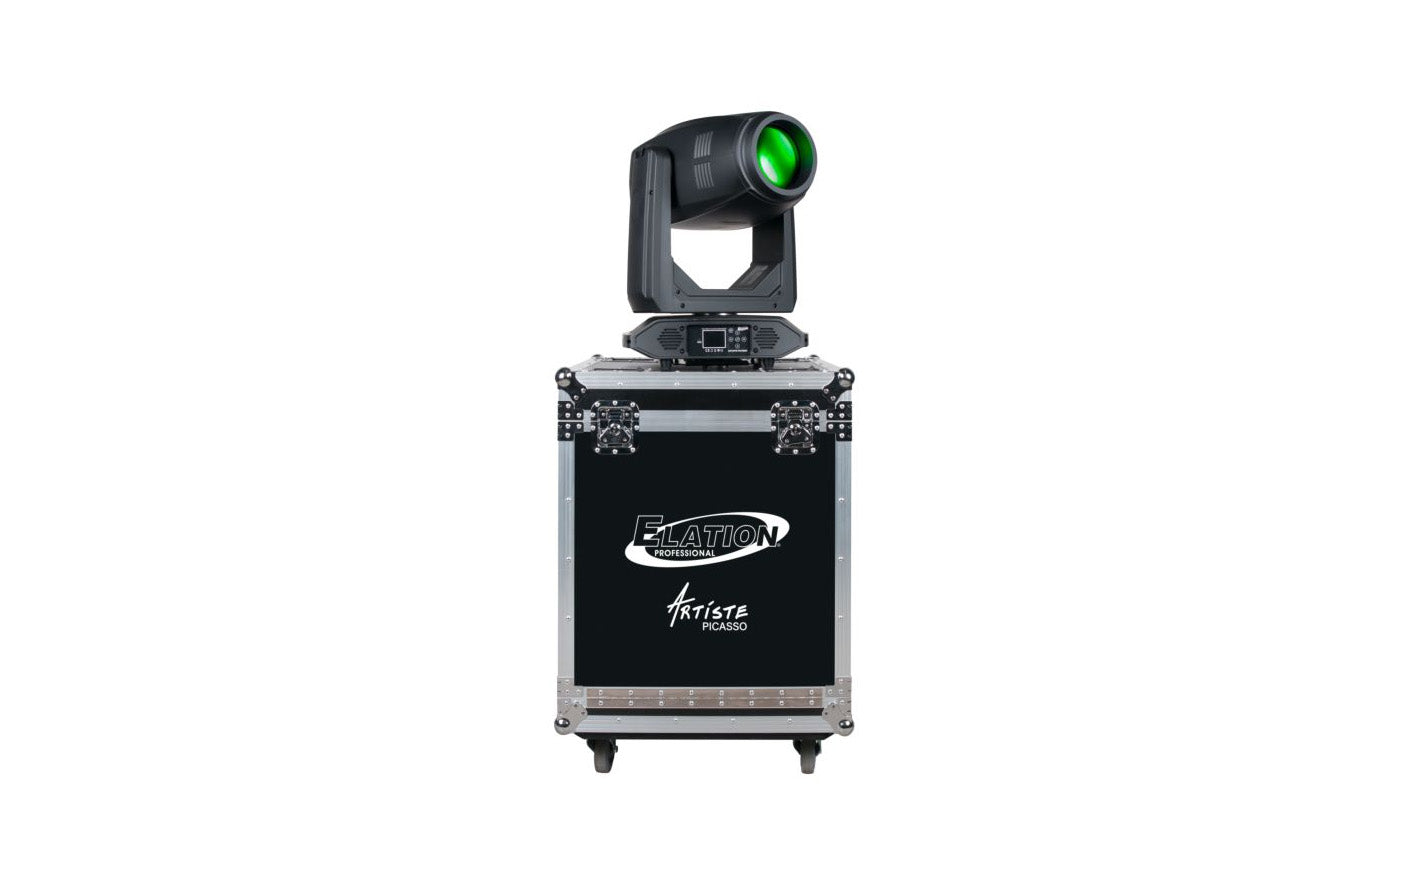 Elation Artiste Picasso FC 620W LED CMY Moving Head Fixture with Zoom, Framing Shutters + Case